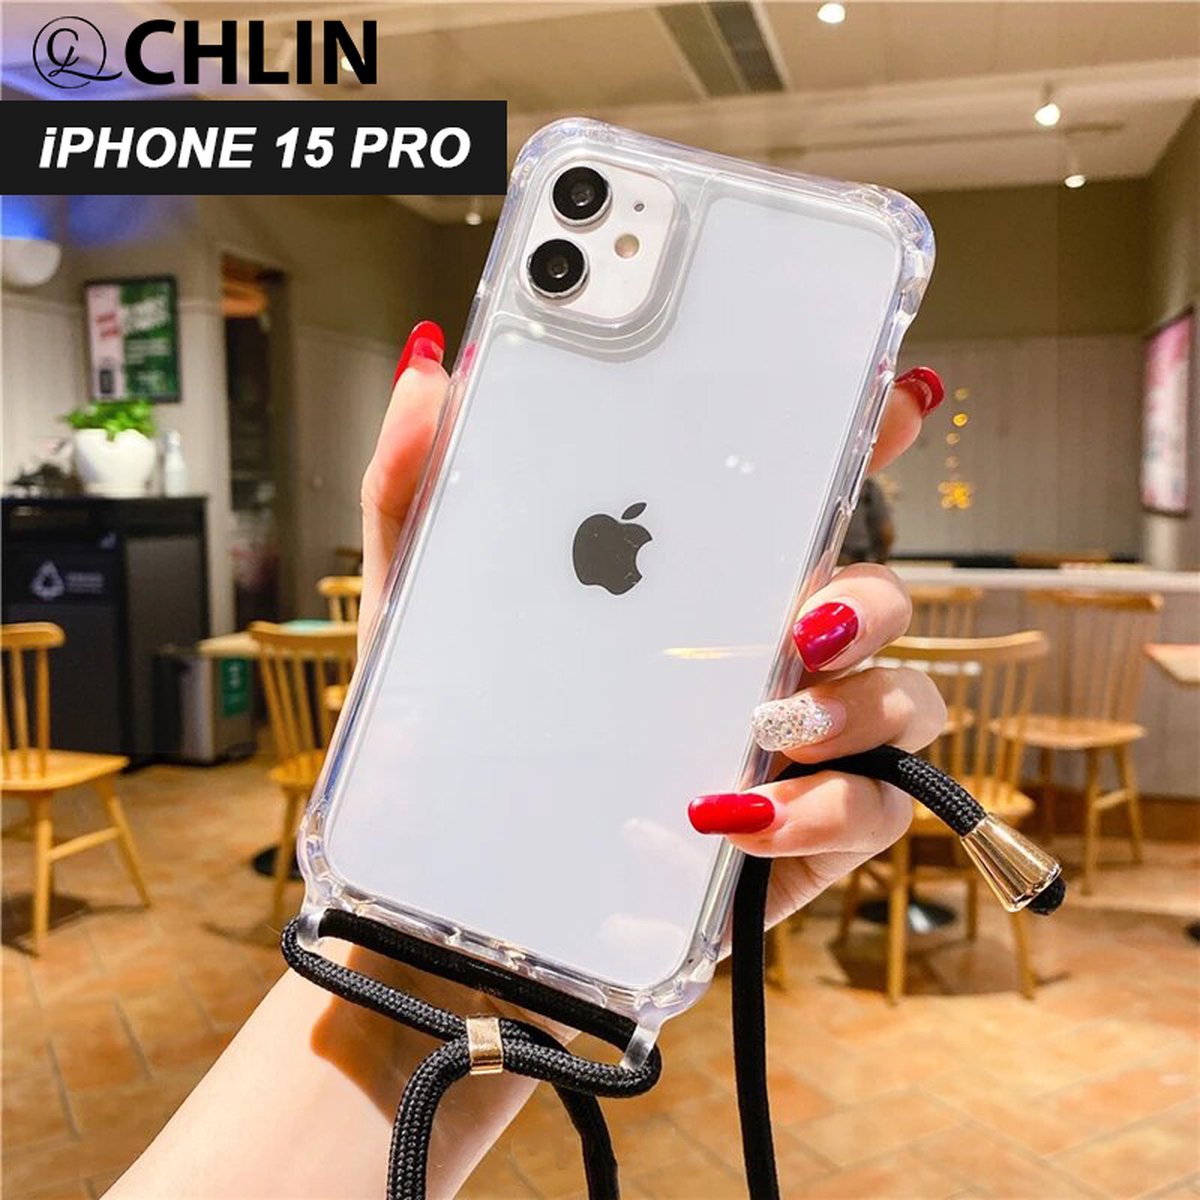 CL CHLIN® - iPhone 15 Pro transparant hoesje met ZWART koord - Hoesje met koord iPhone 15 Pro - iPhone 15 Pro case - iPhone 15 Pro hoes - iPhone hoesje met cord - iPhone 15 Pro bescherming - iPhone 15 Pro protector.